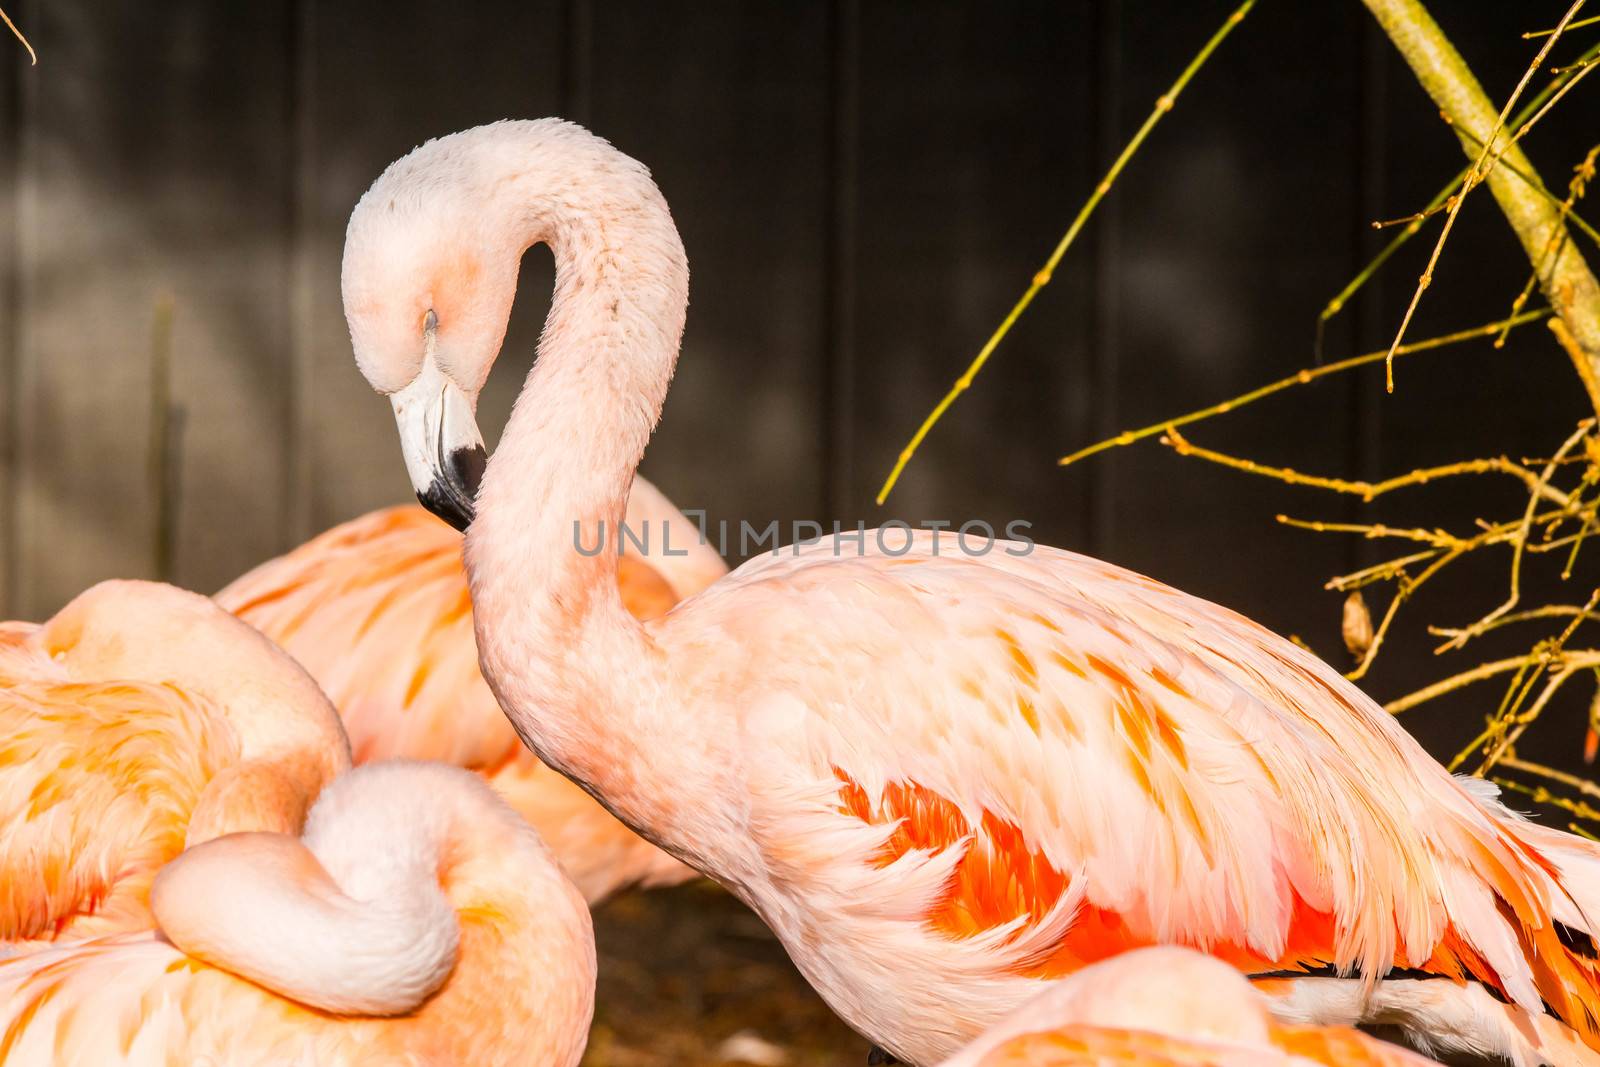 Three flamingos' necks and one head shown with beaks in feathers.